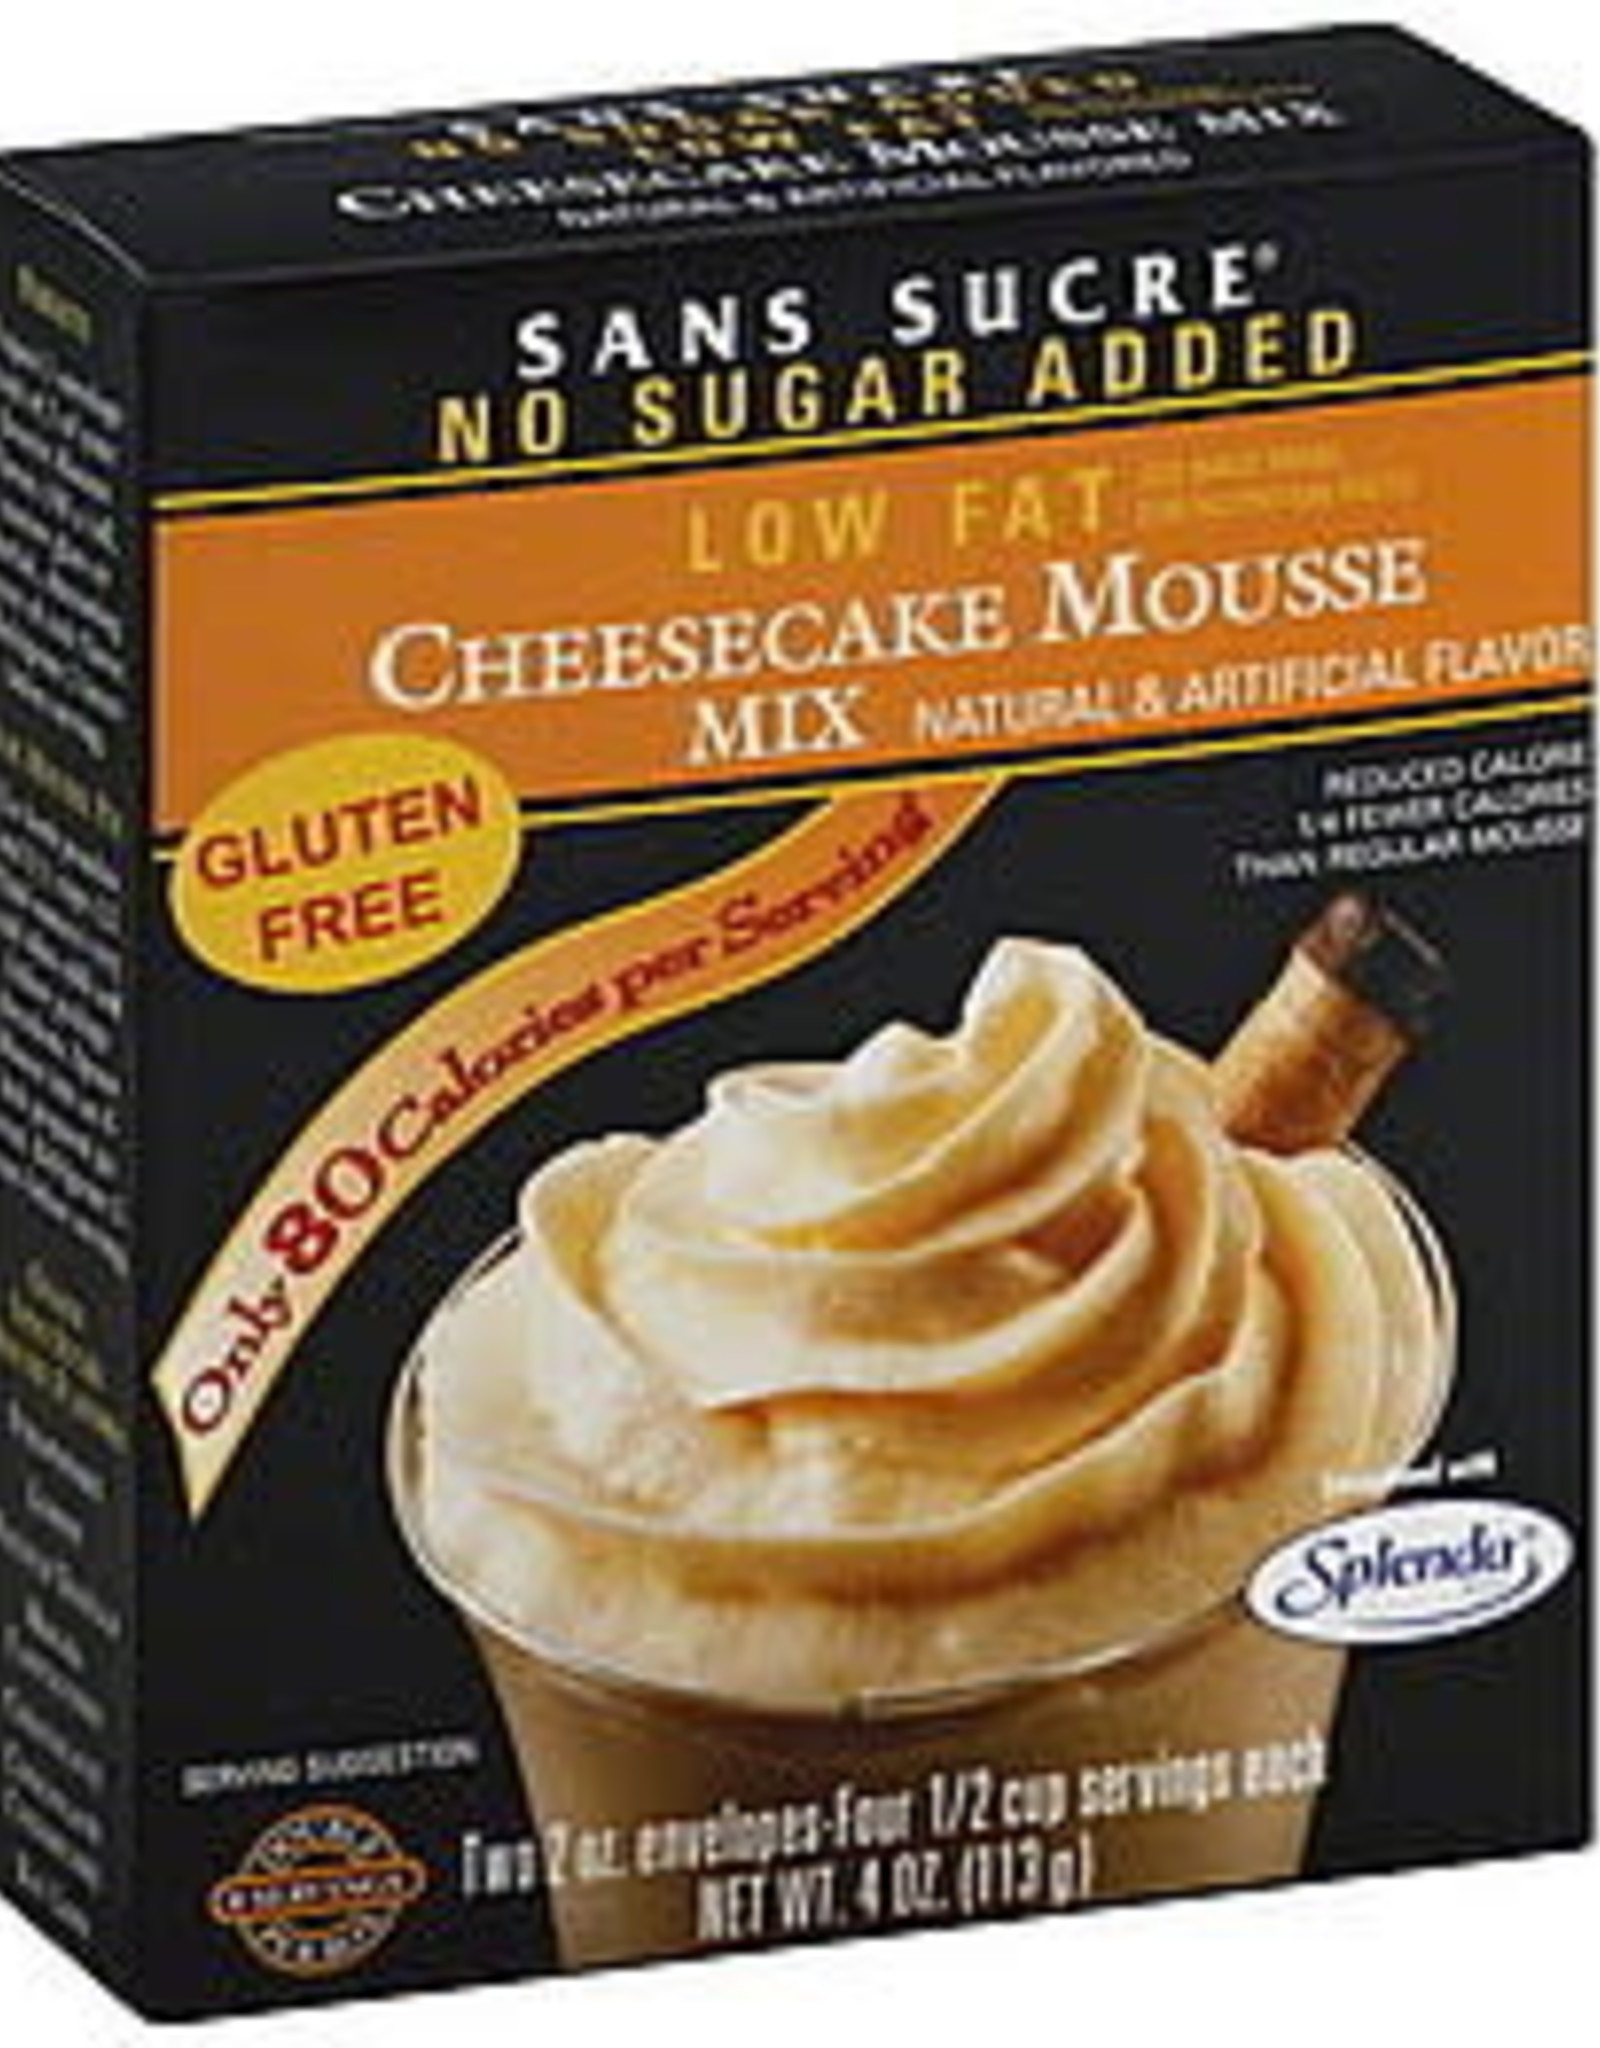 Sans Sucre Mousse Cheesecake